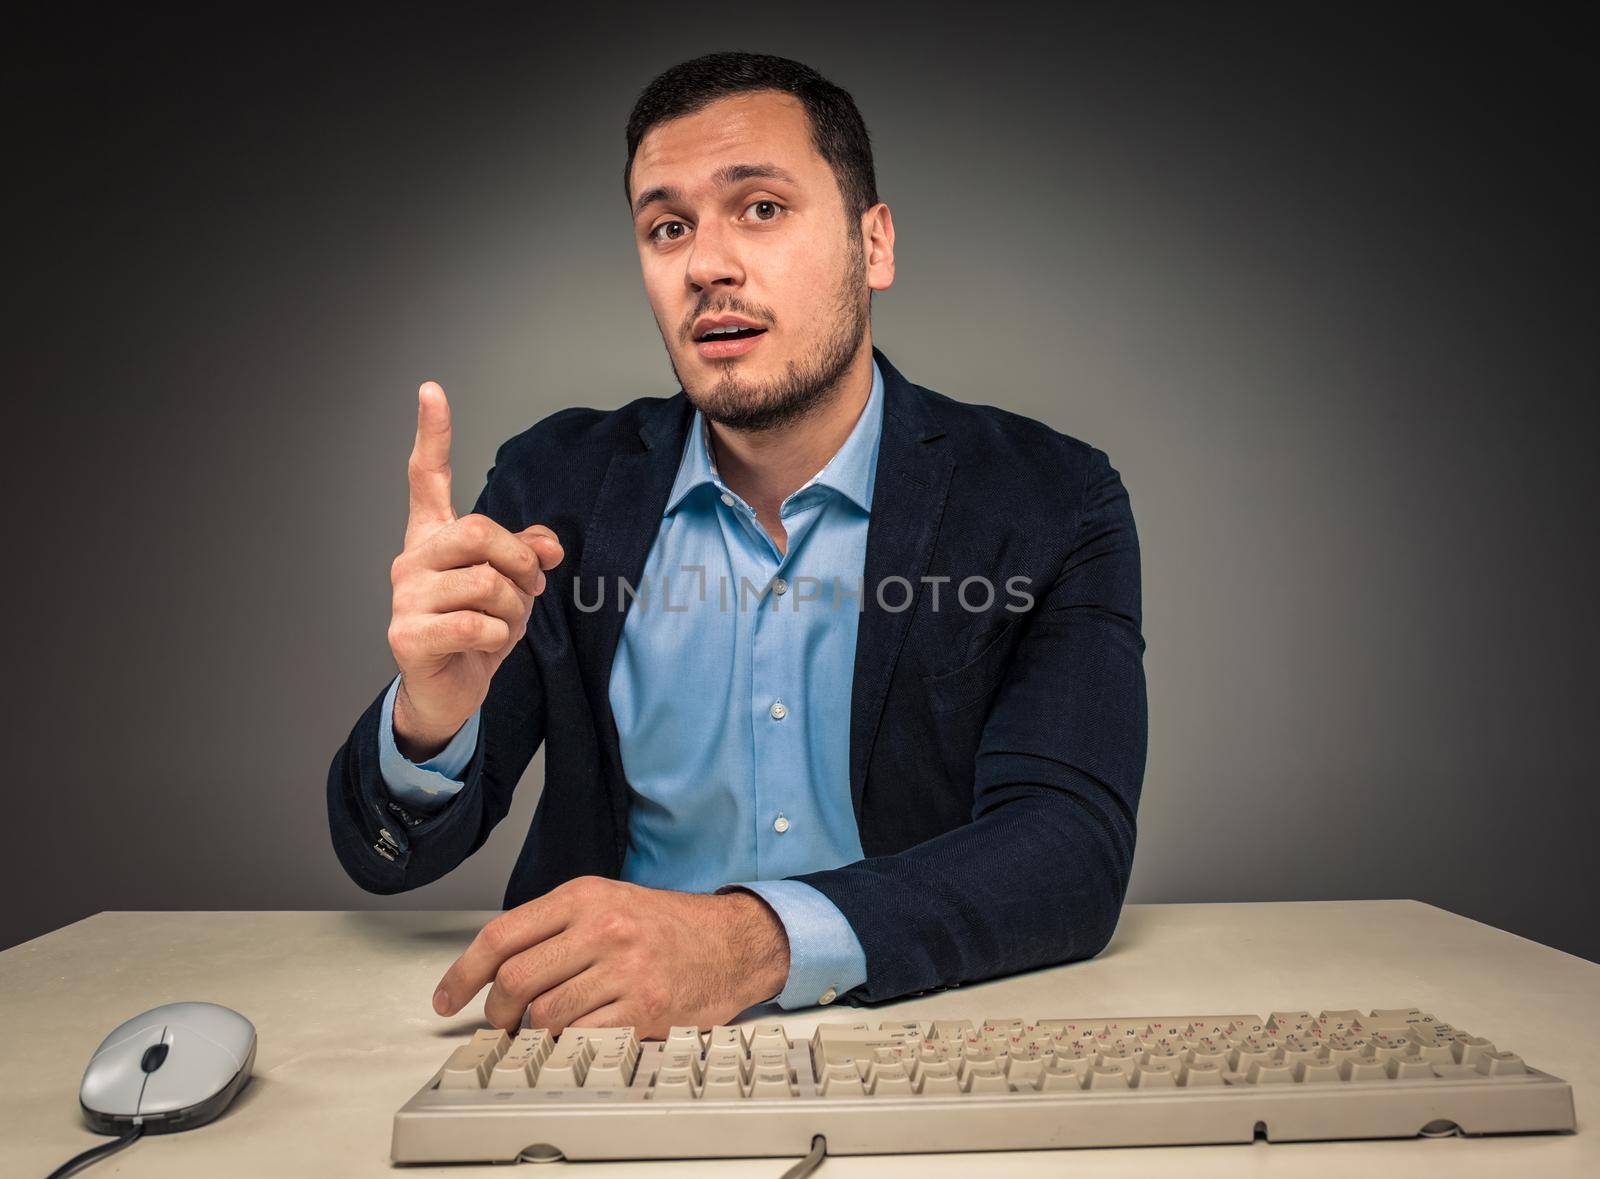 Handsome man raised his index finger and looking at the camera, sitting at a desk near a computer, isolated on gray background. Concept of the idea or warning